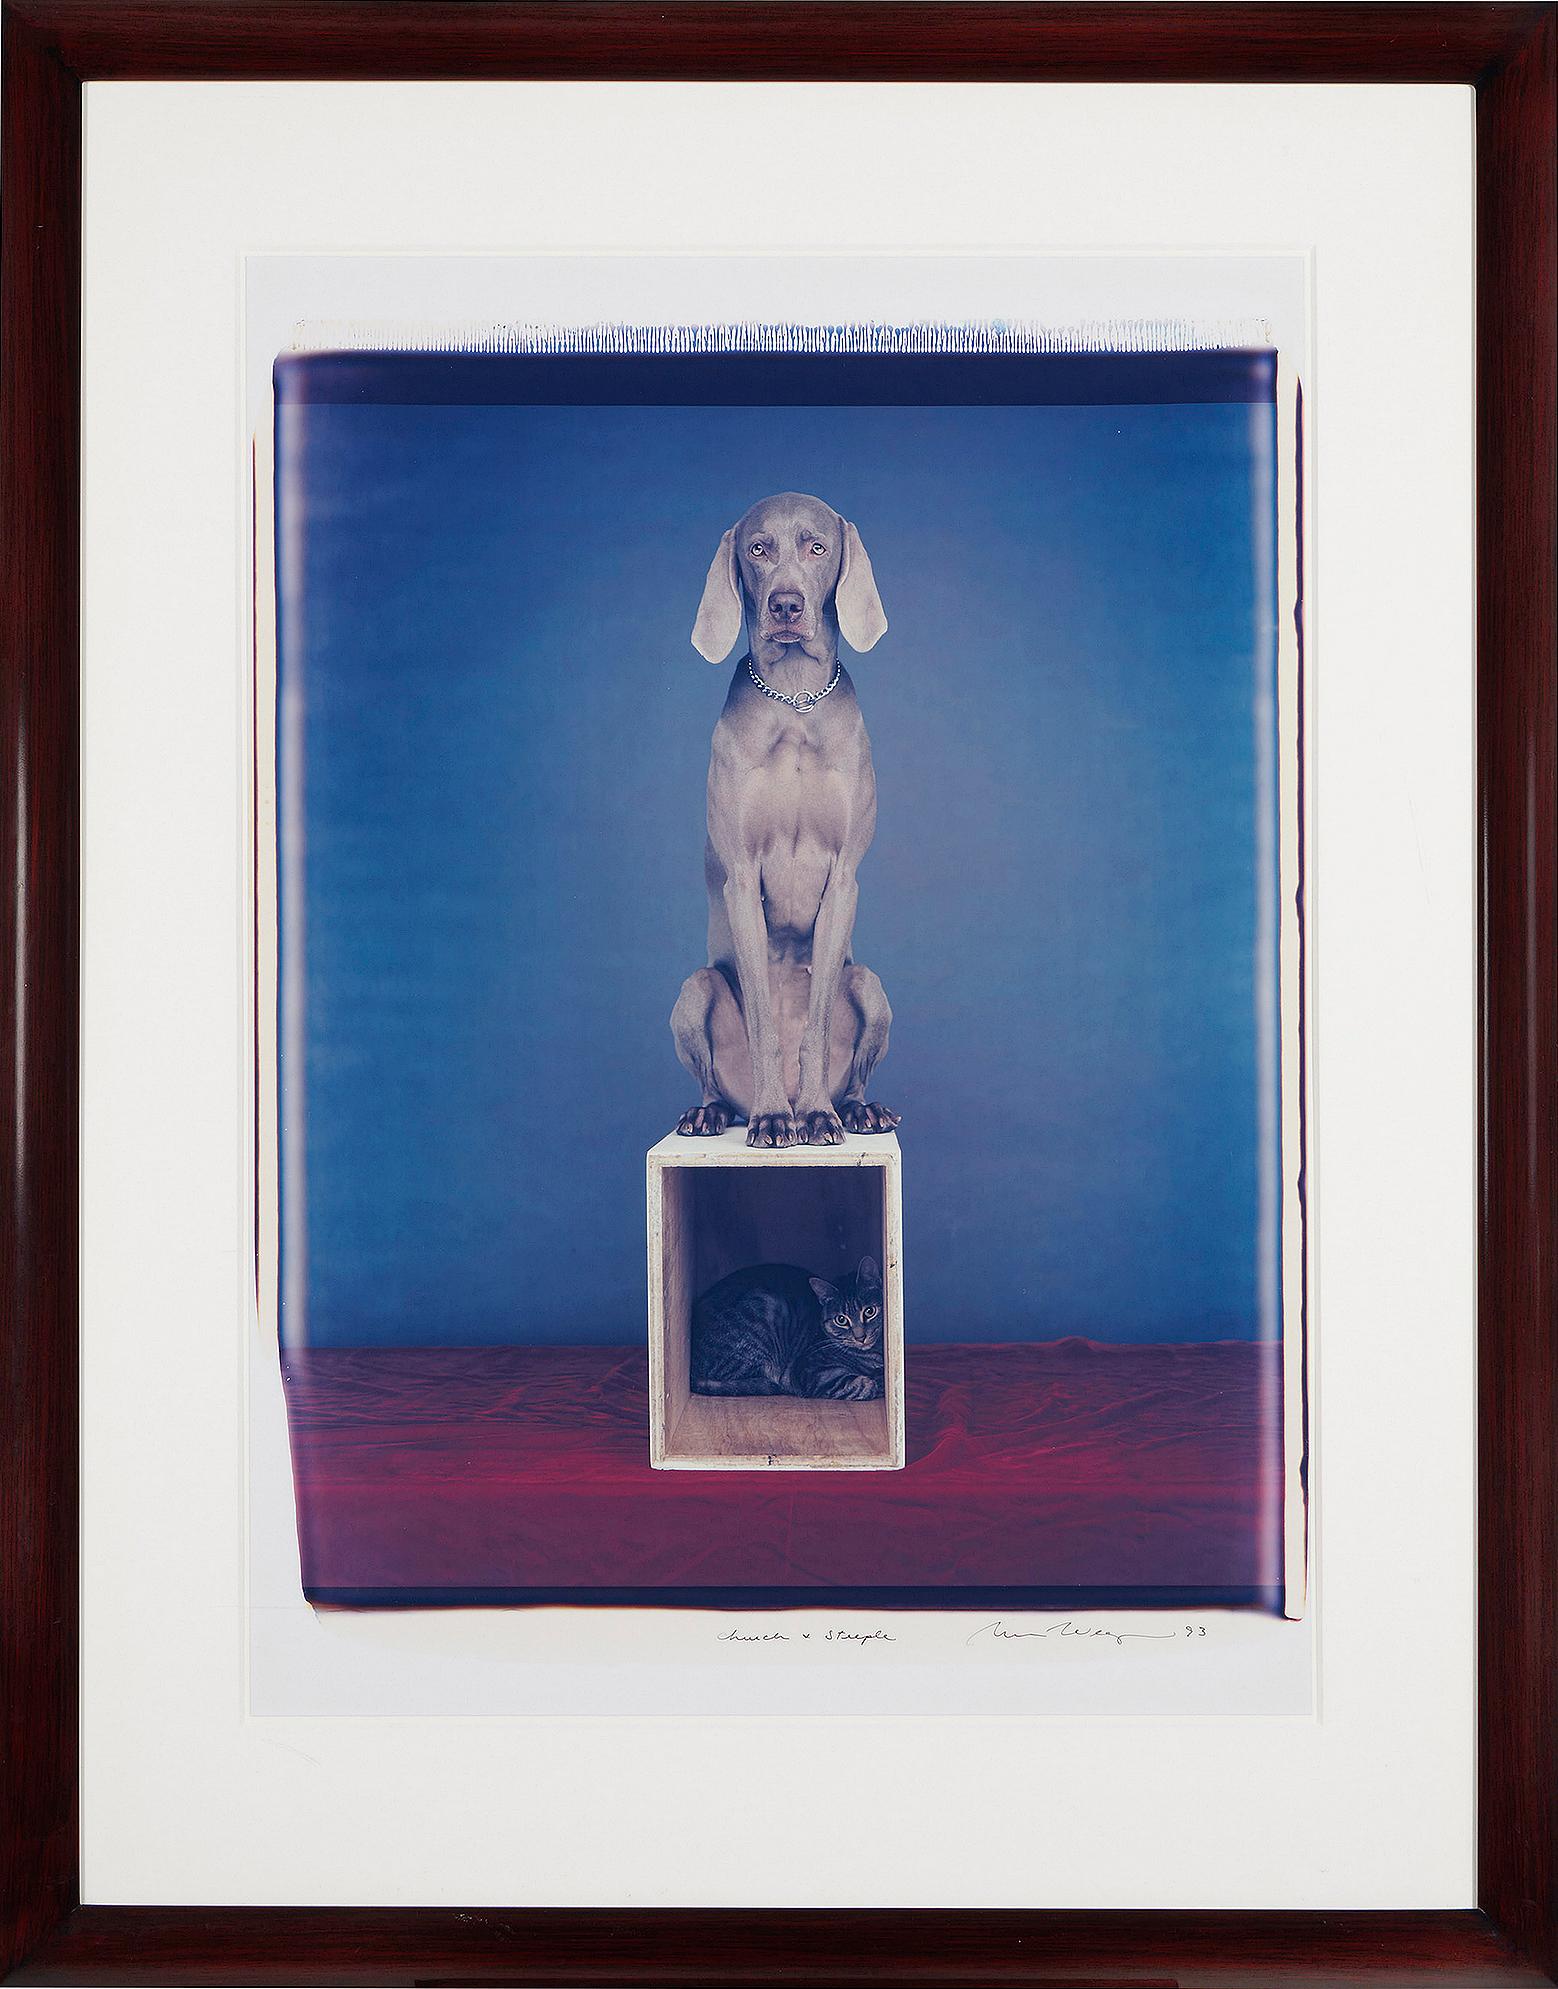 William Wegman's highly conceptual Dog - Cat interaction is depicted in this large-format Polaroid Polacolor print that features a double portrait - a Dog and a Cat - together but separate in their own defined space. 
Signed, titled, and dated to